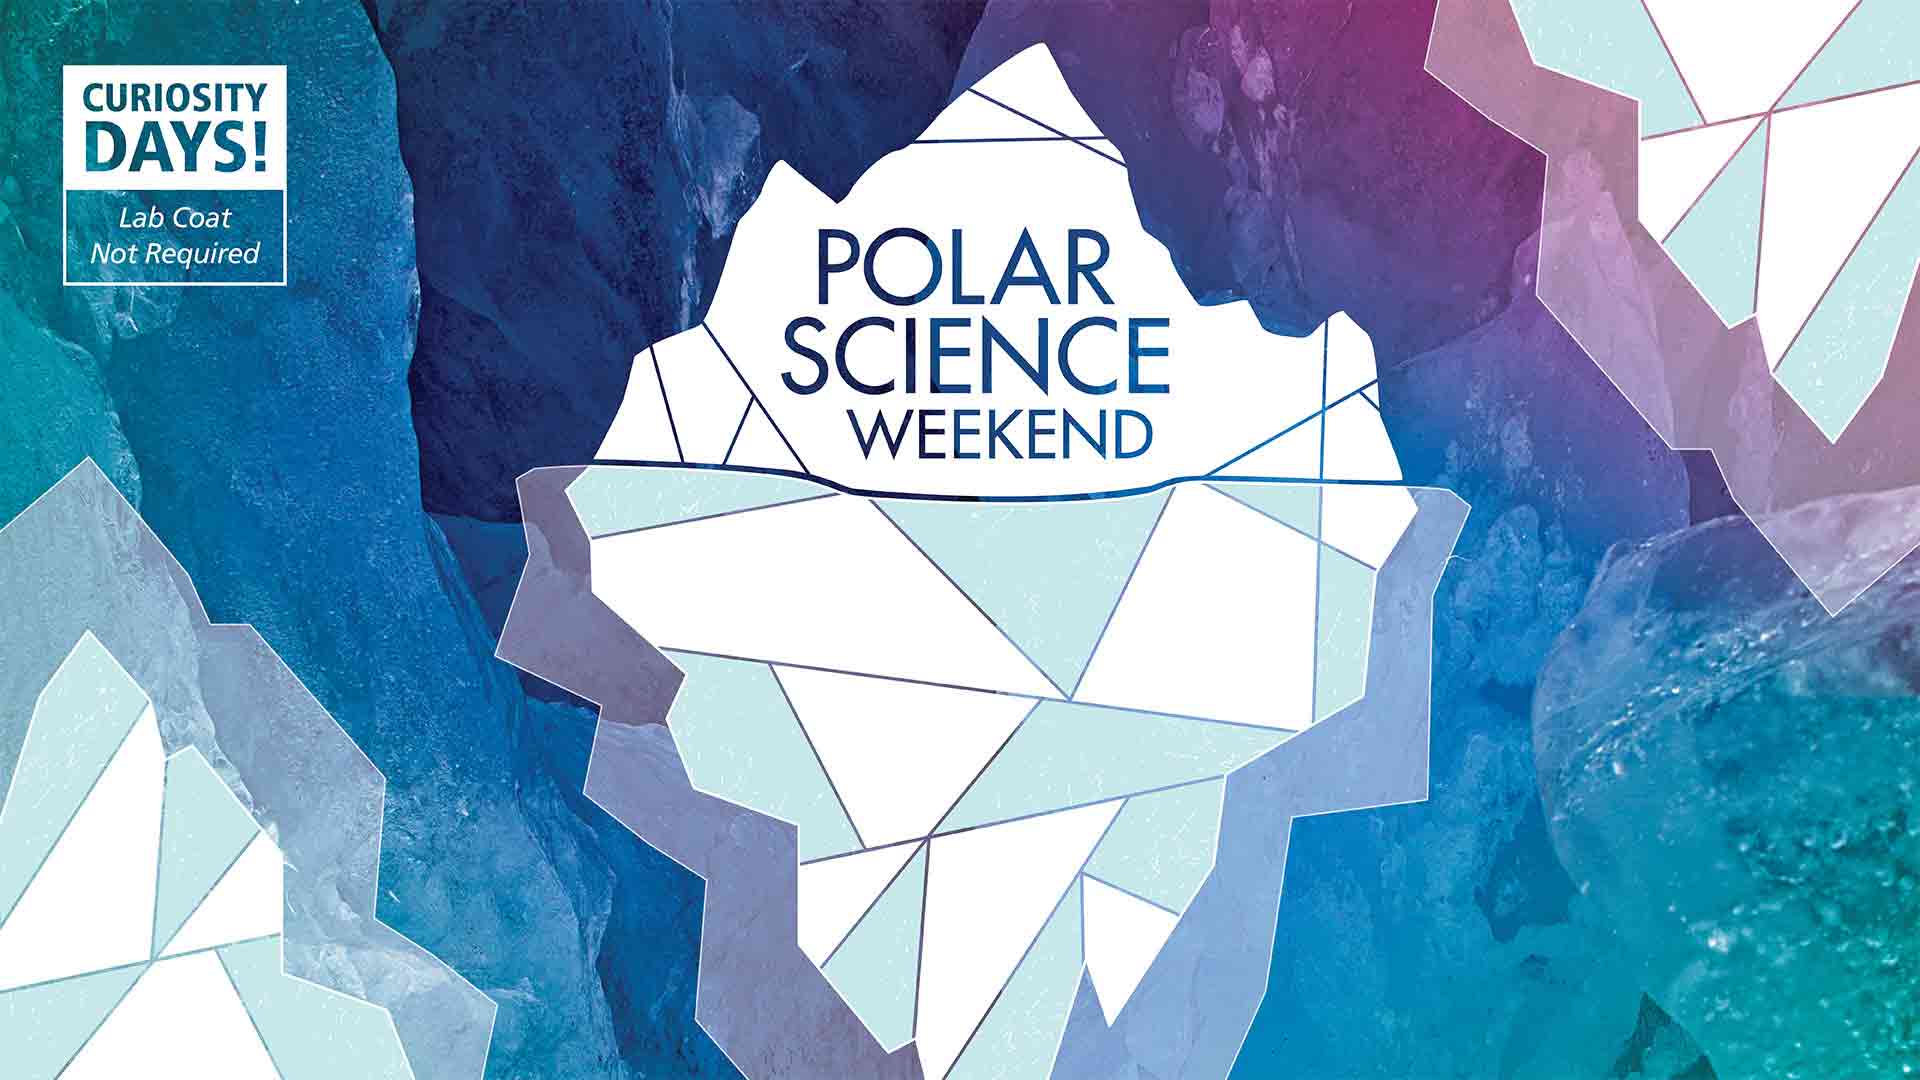 Polar Science Weekend at Pacific Science Center | Pacific Science Center